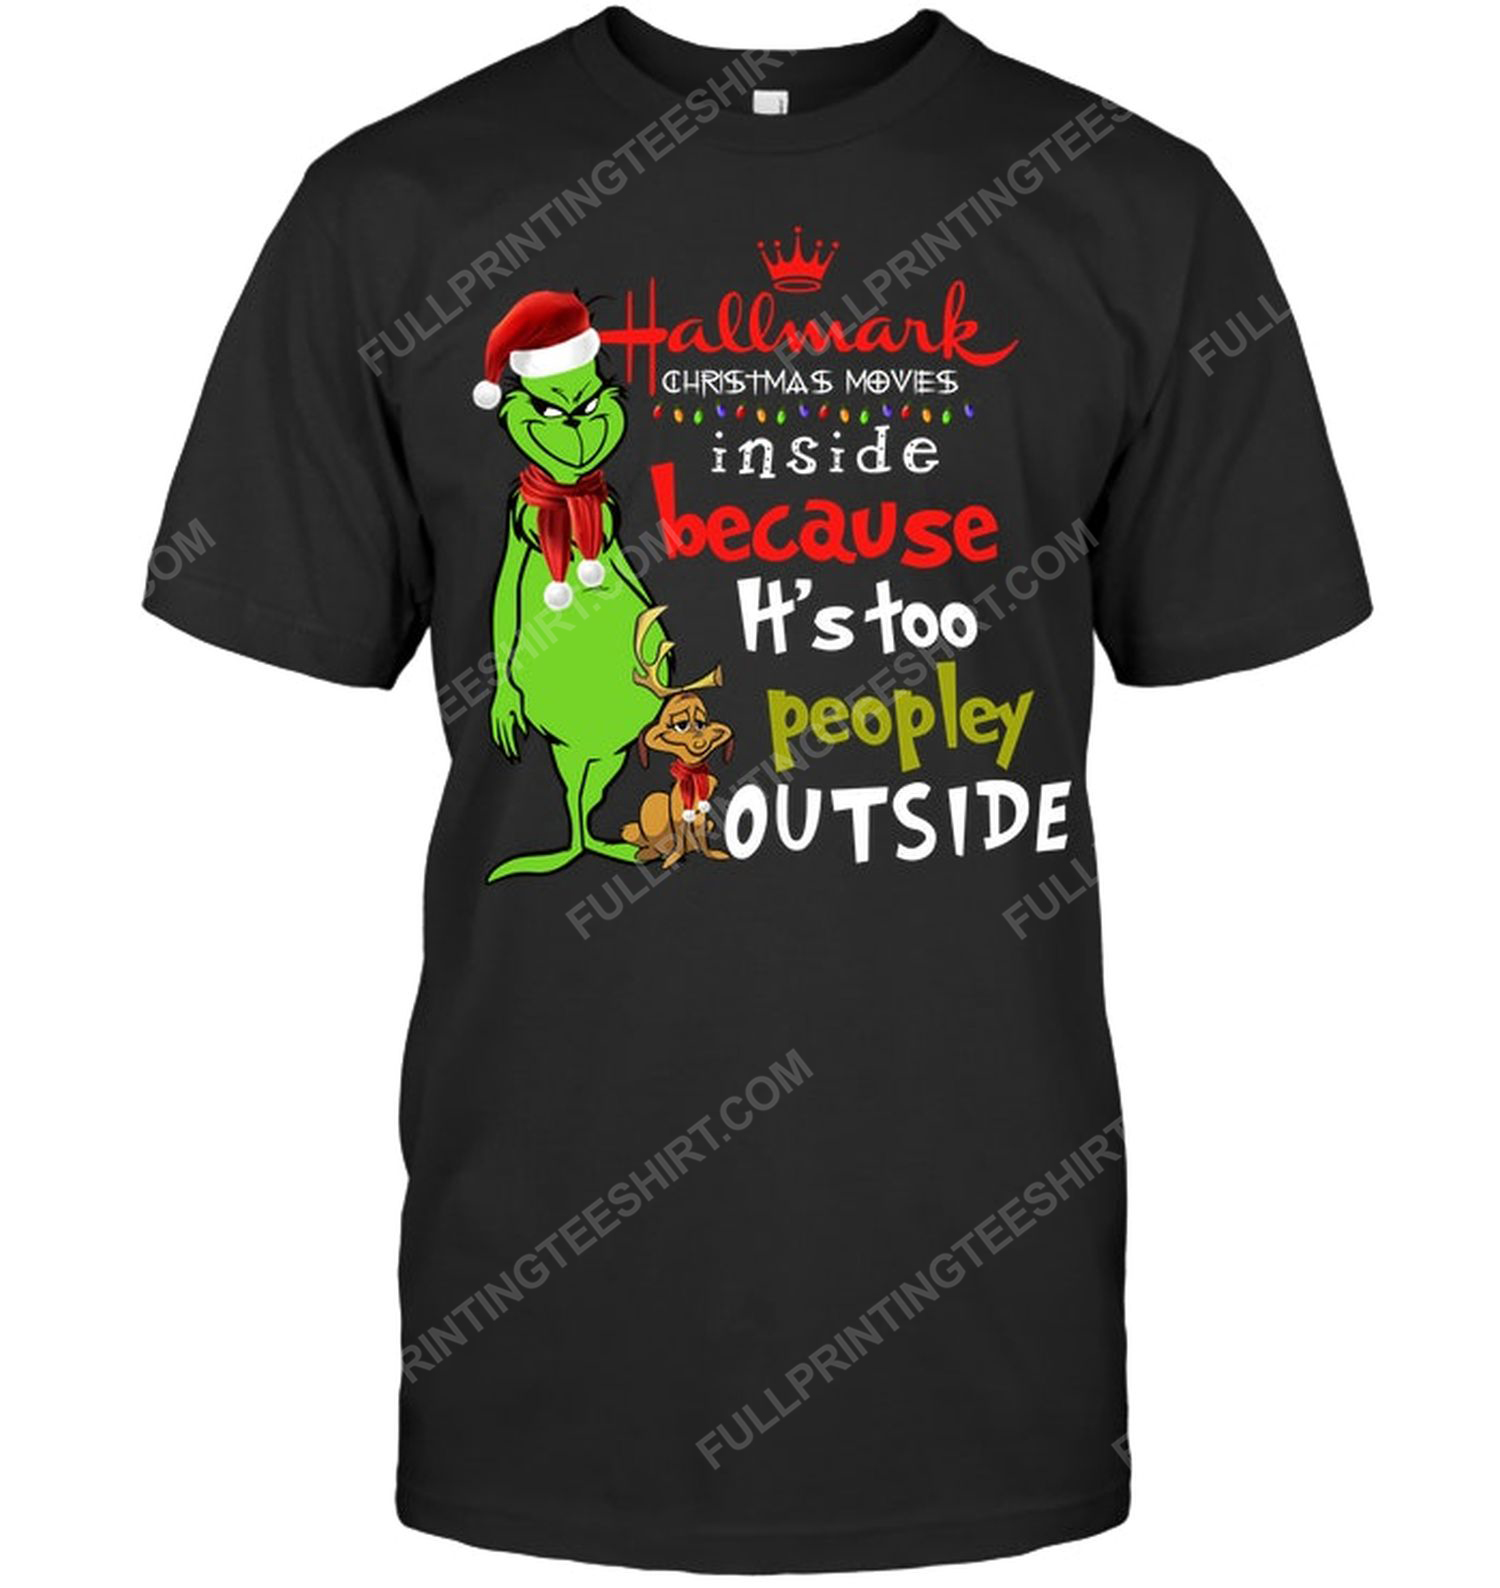 Hallmark christmas movies inside because it's too peopley outside grinch tshirt